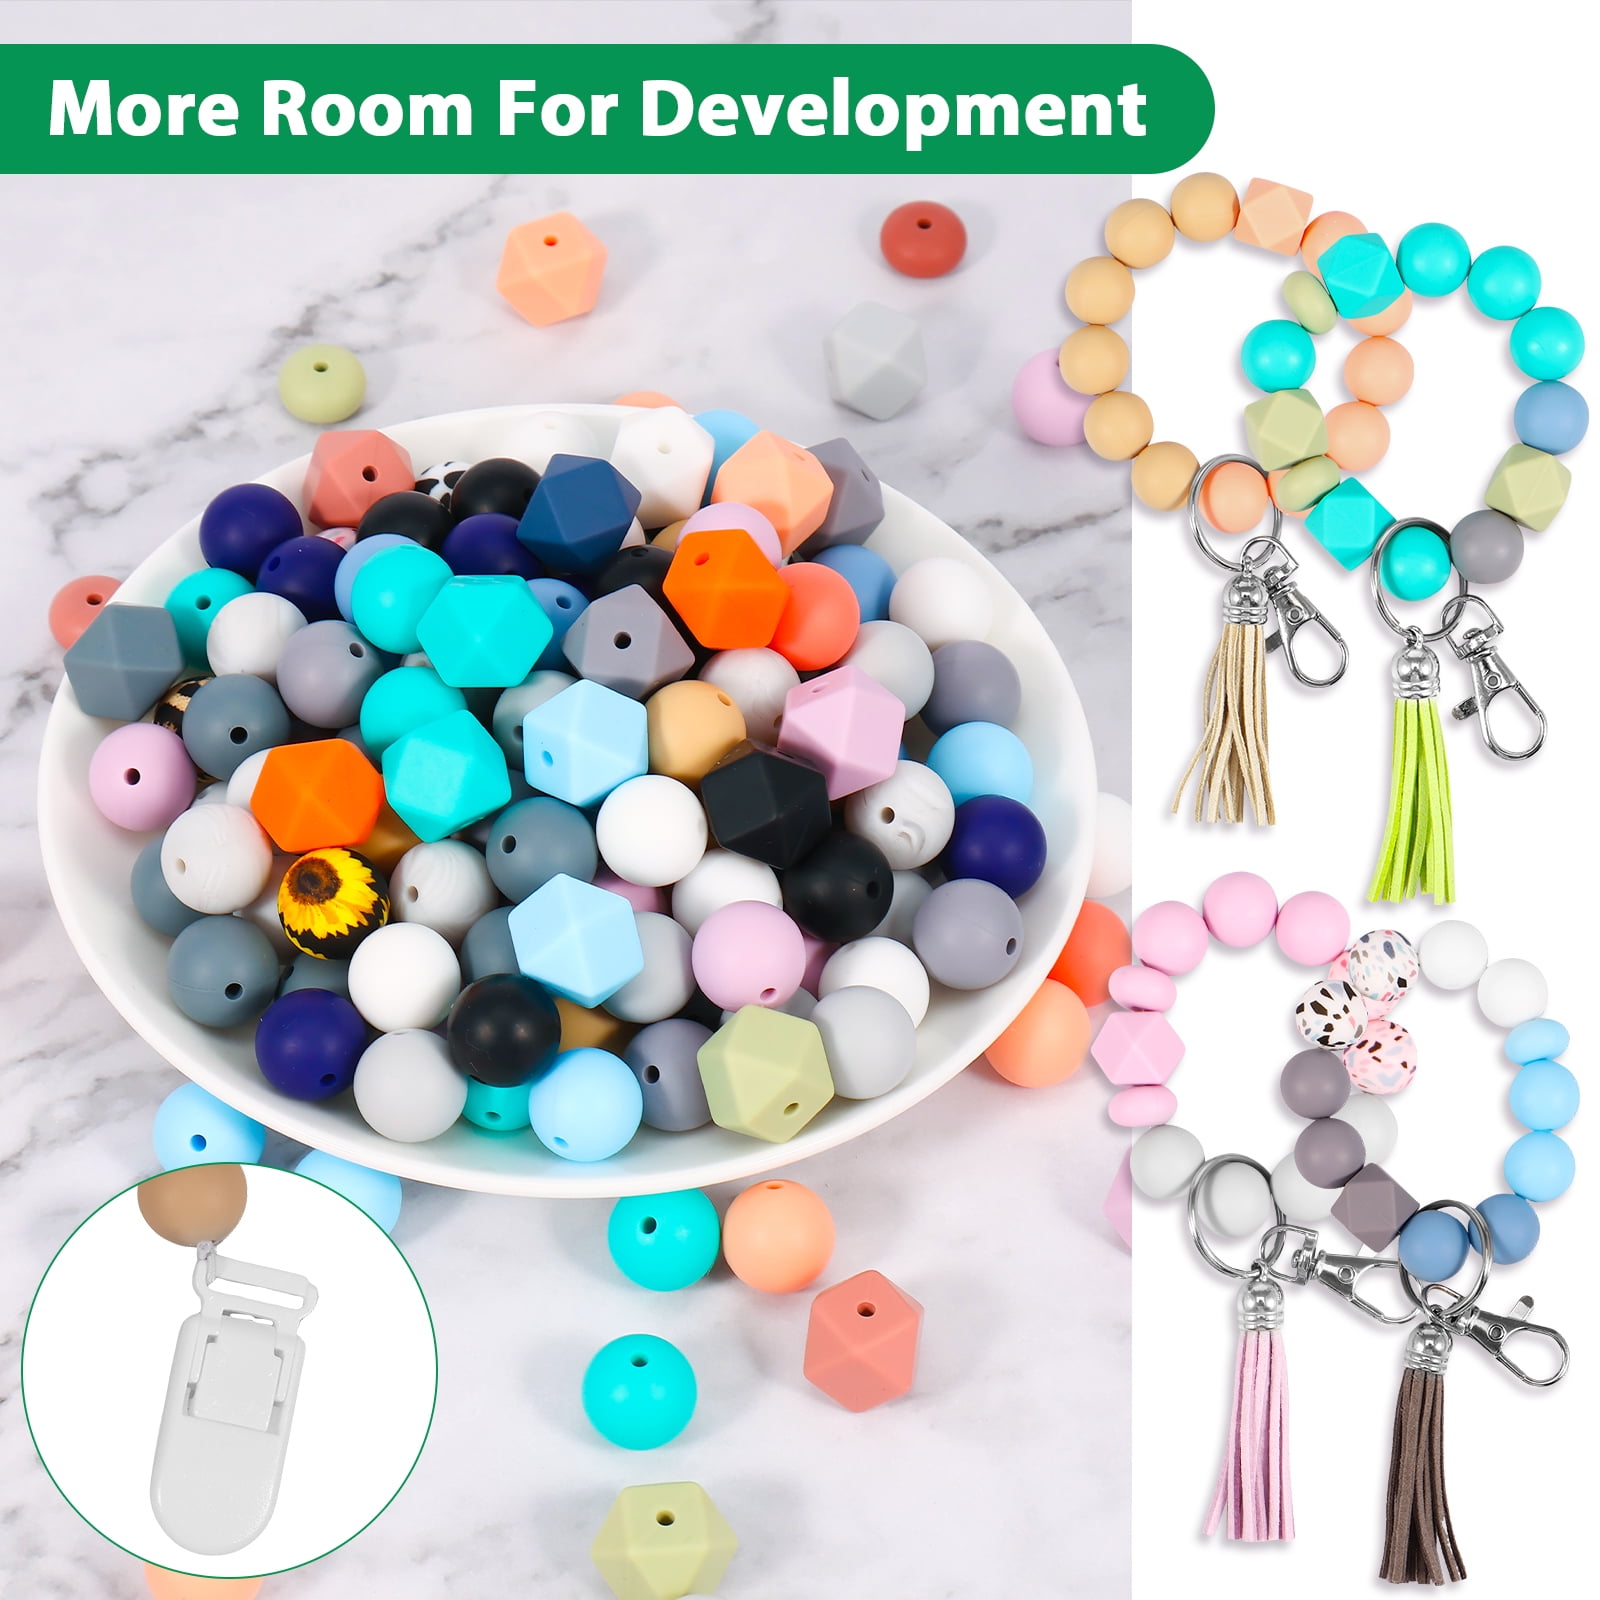 Mr.EV Silicone Beads for Keychain Making Silicone Beads 15mm Rubber Beads for Keychains Pink and Blue 15mm Silicone Beads Bulk with Tassel Kits for